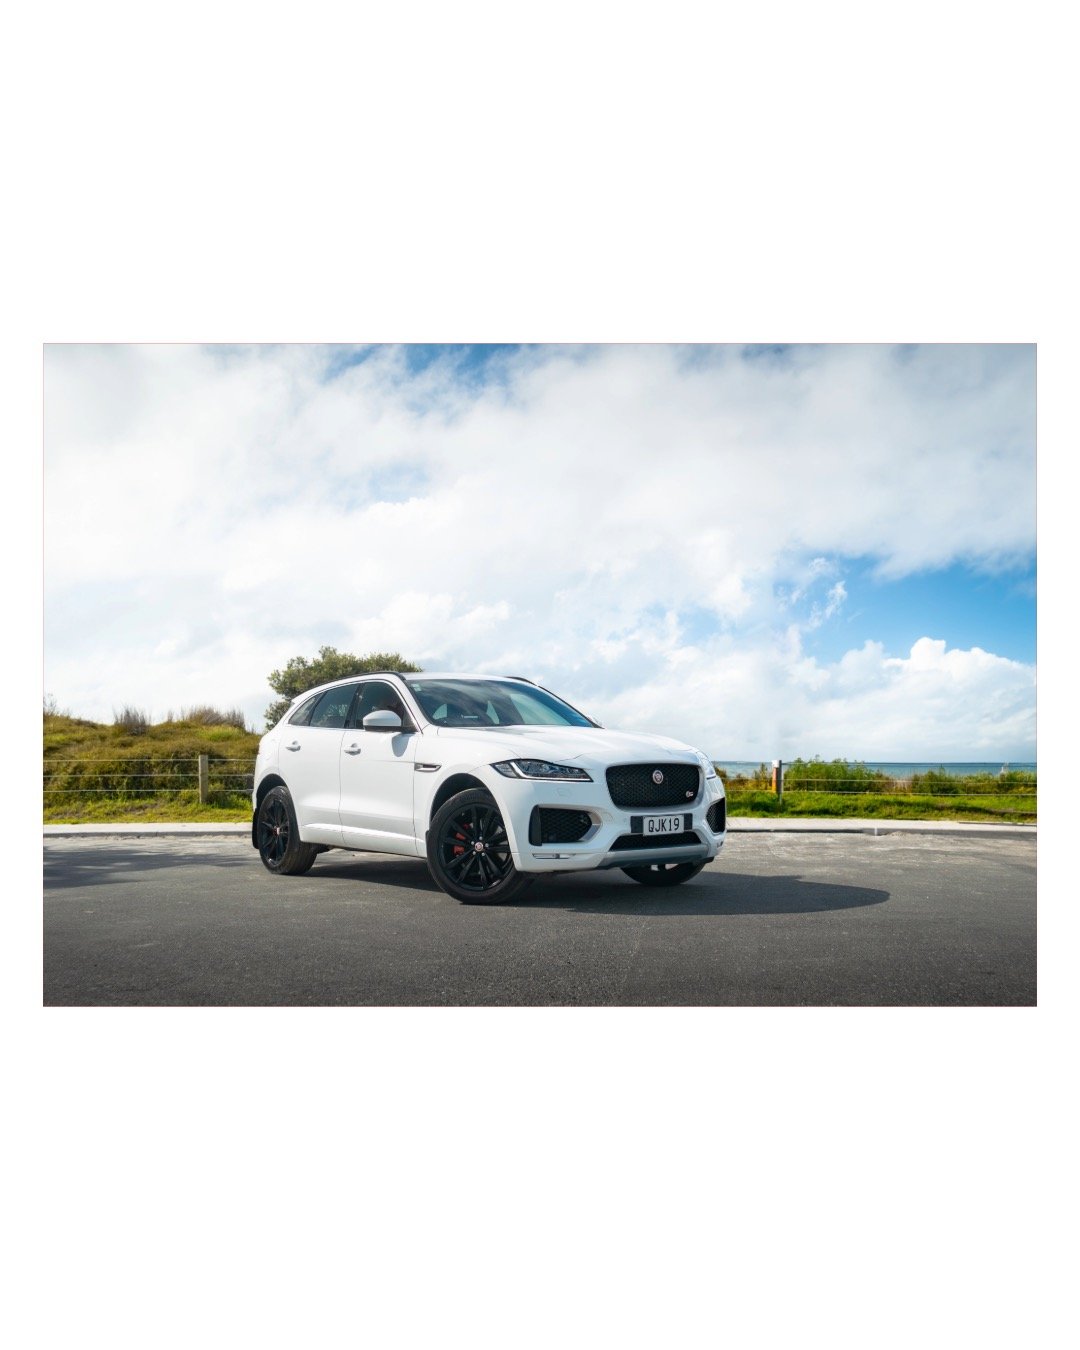 Scroll to the last slide to hear what I think of posting portrait on Insta...

#carphotography #lumixnz #lumixg85 #photography @jaguar_nz #fpace #jaguar